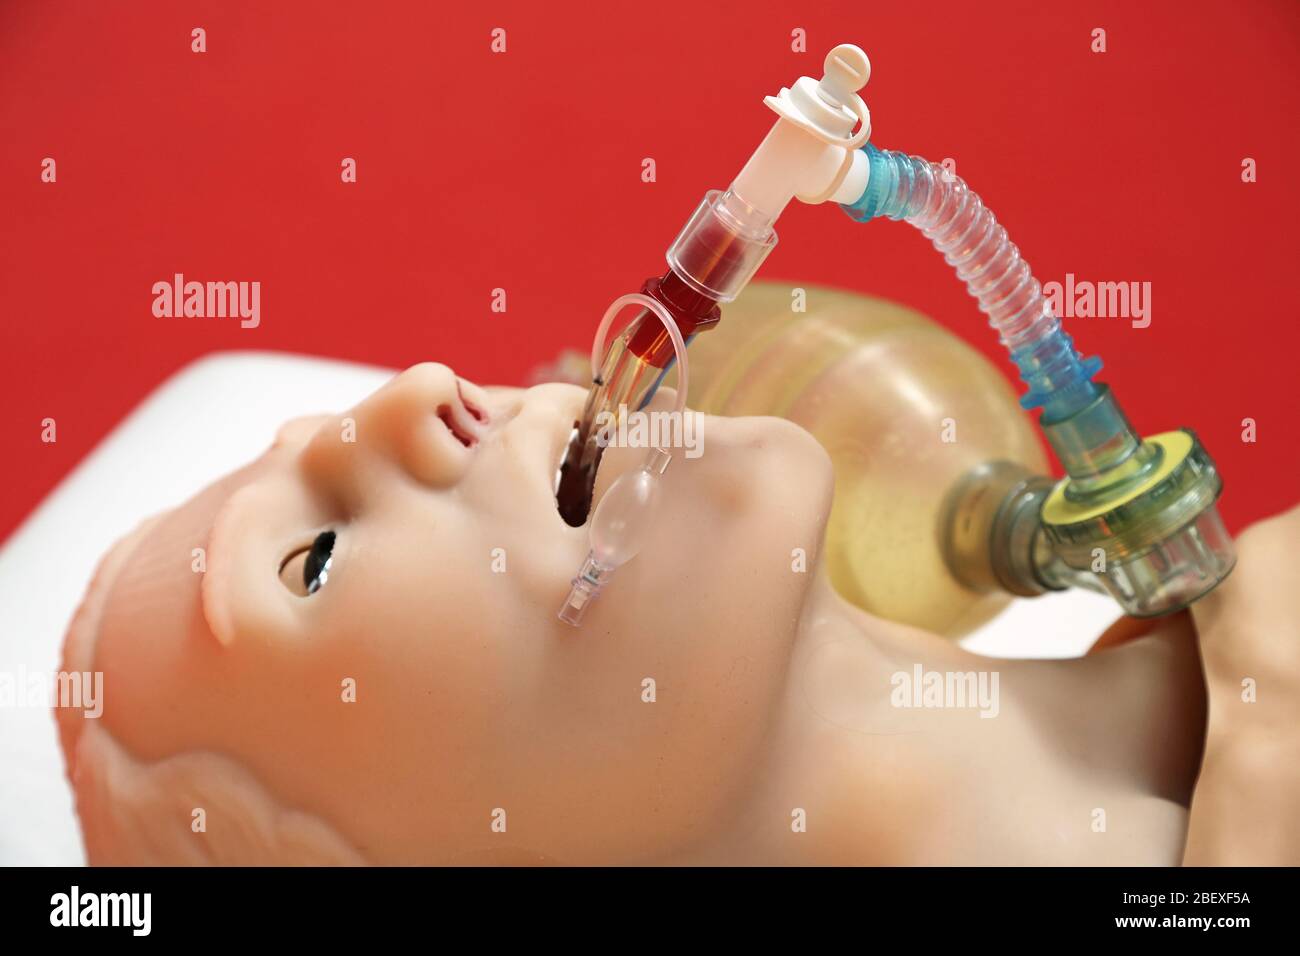 artificial respiration on patient simulator Stock Photo